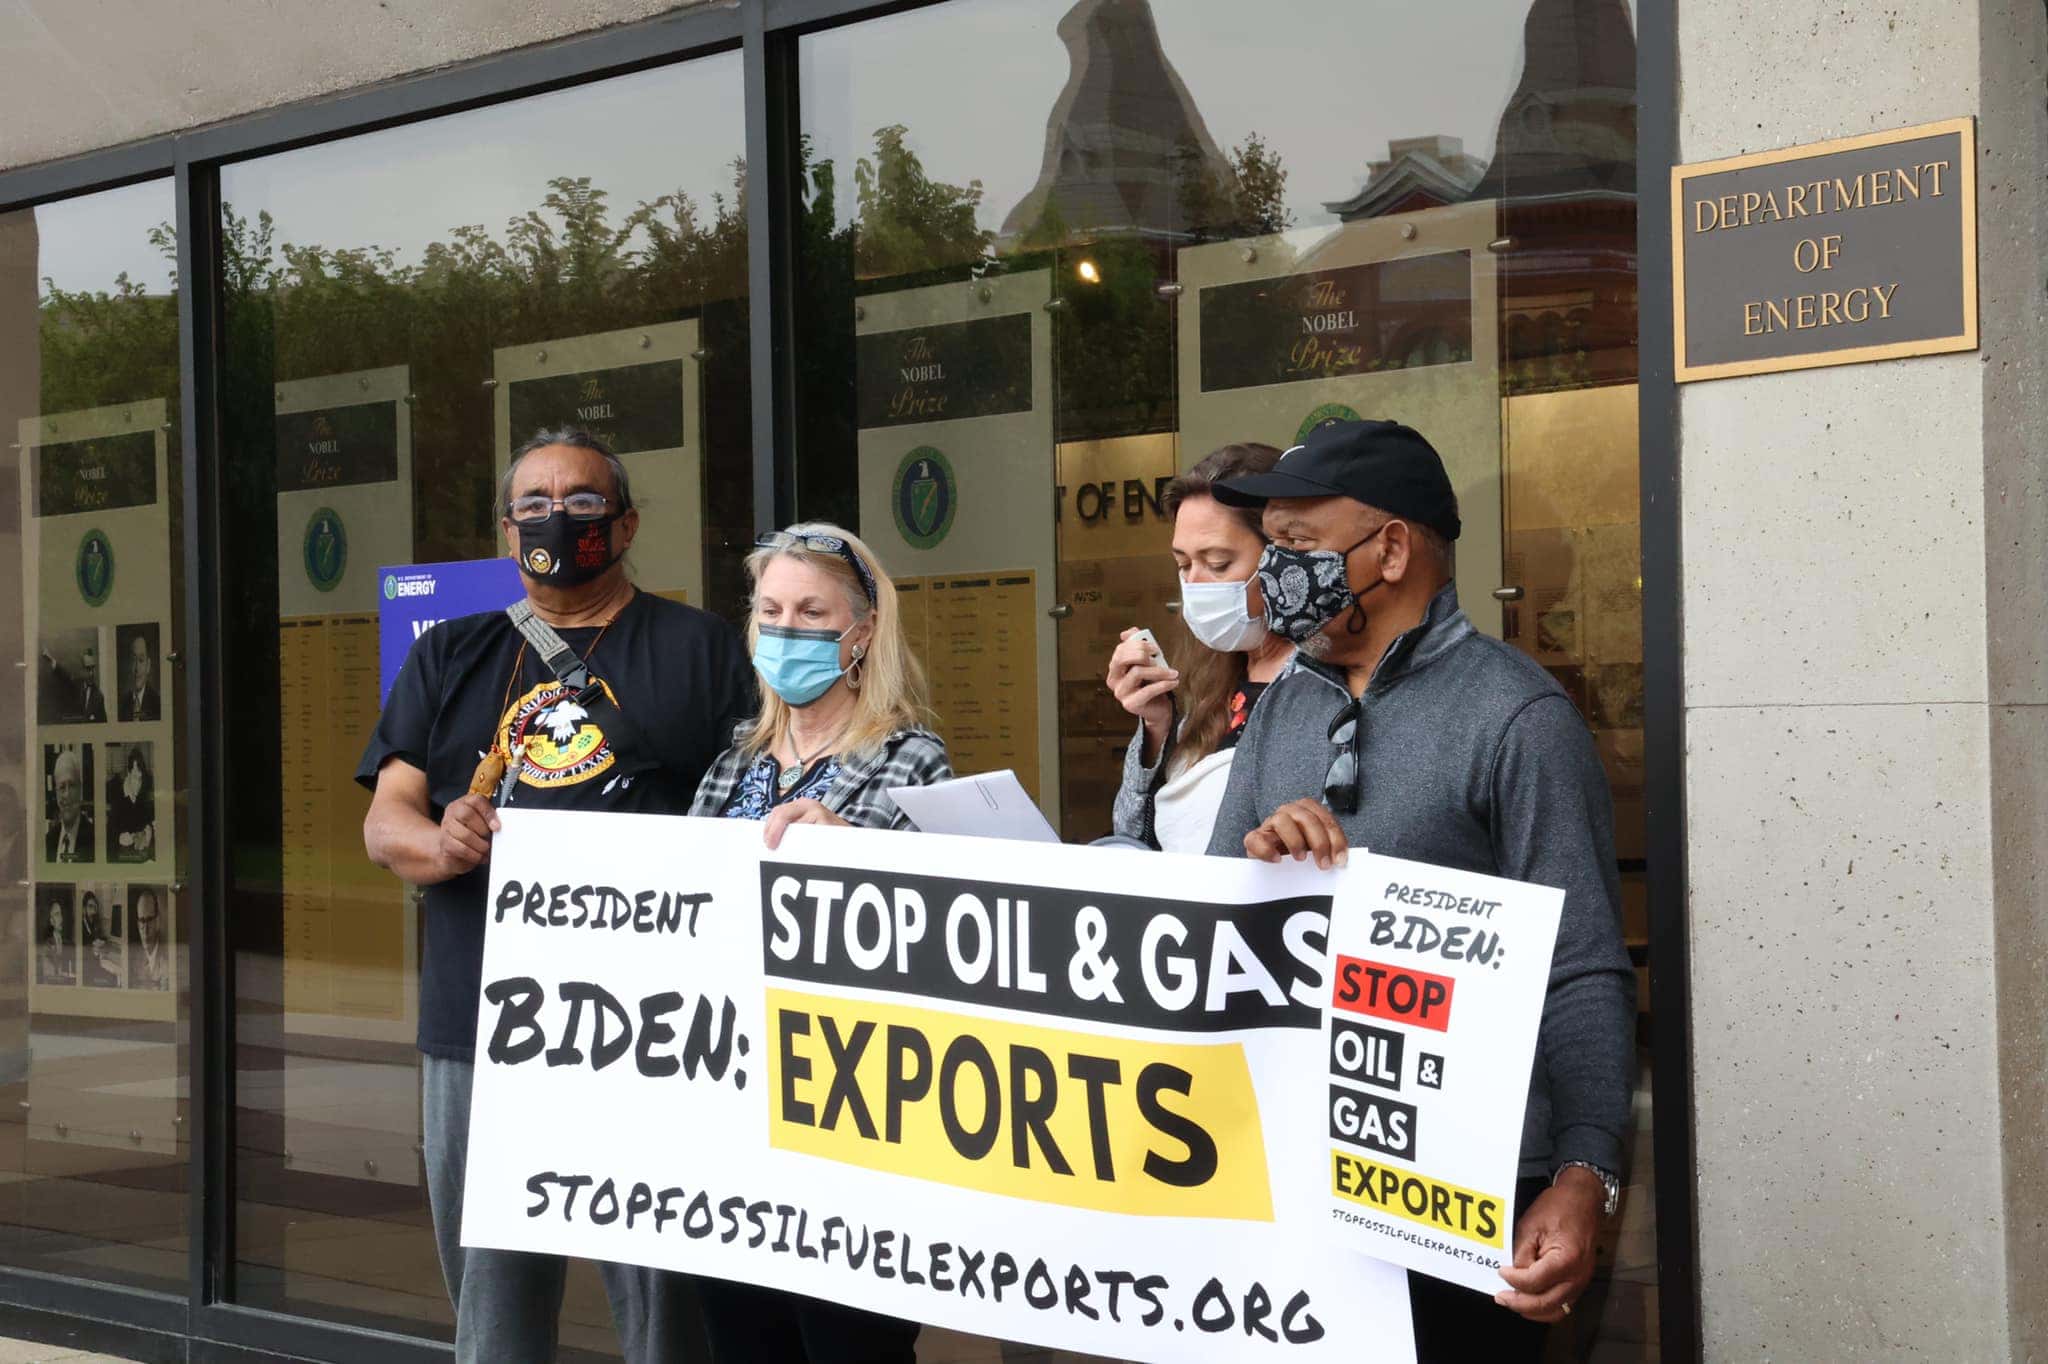 A group of four people stand holding a protest banner that reads, "President Biden, stop oil & gas exports."